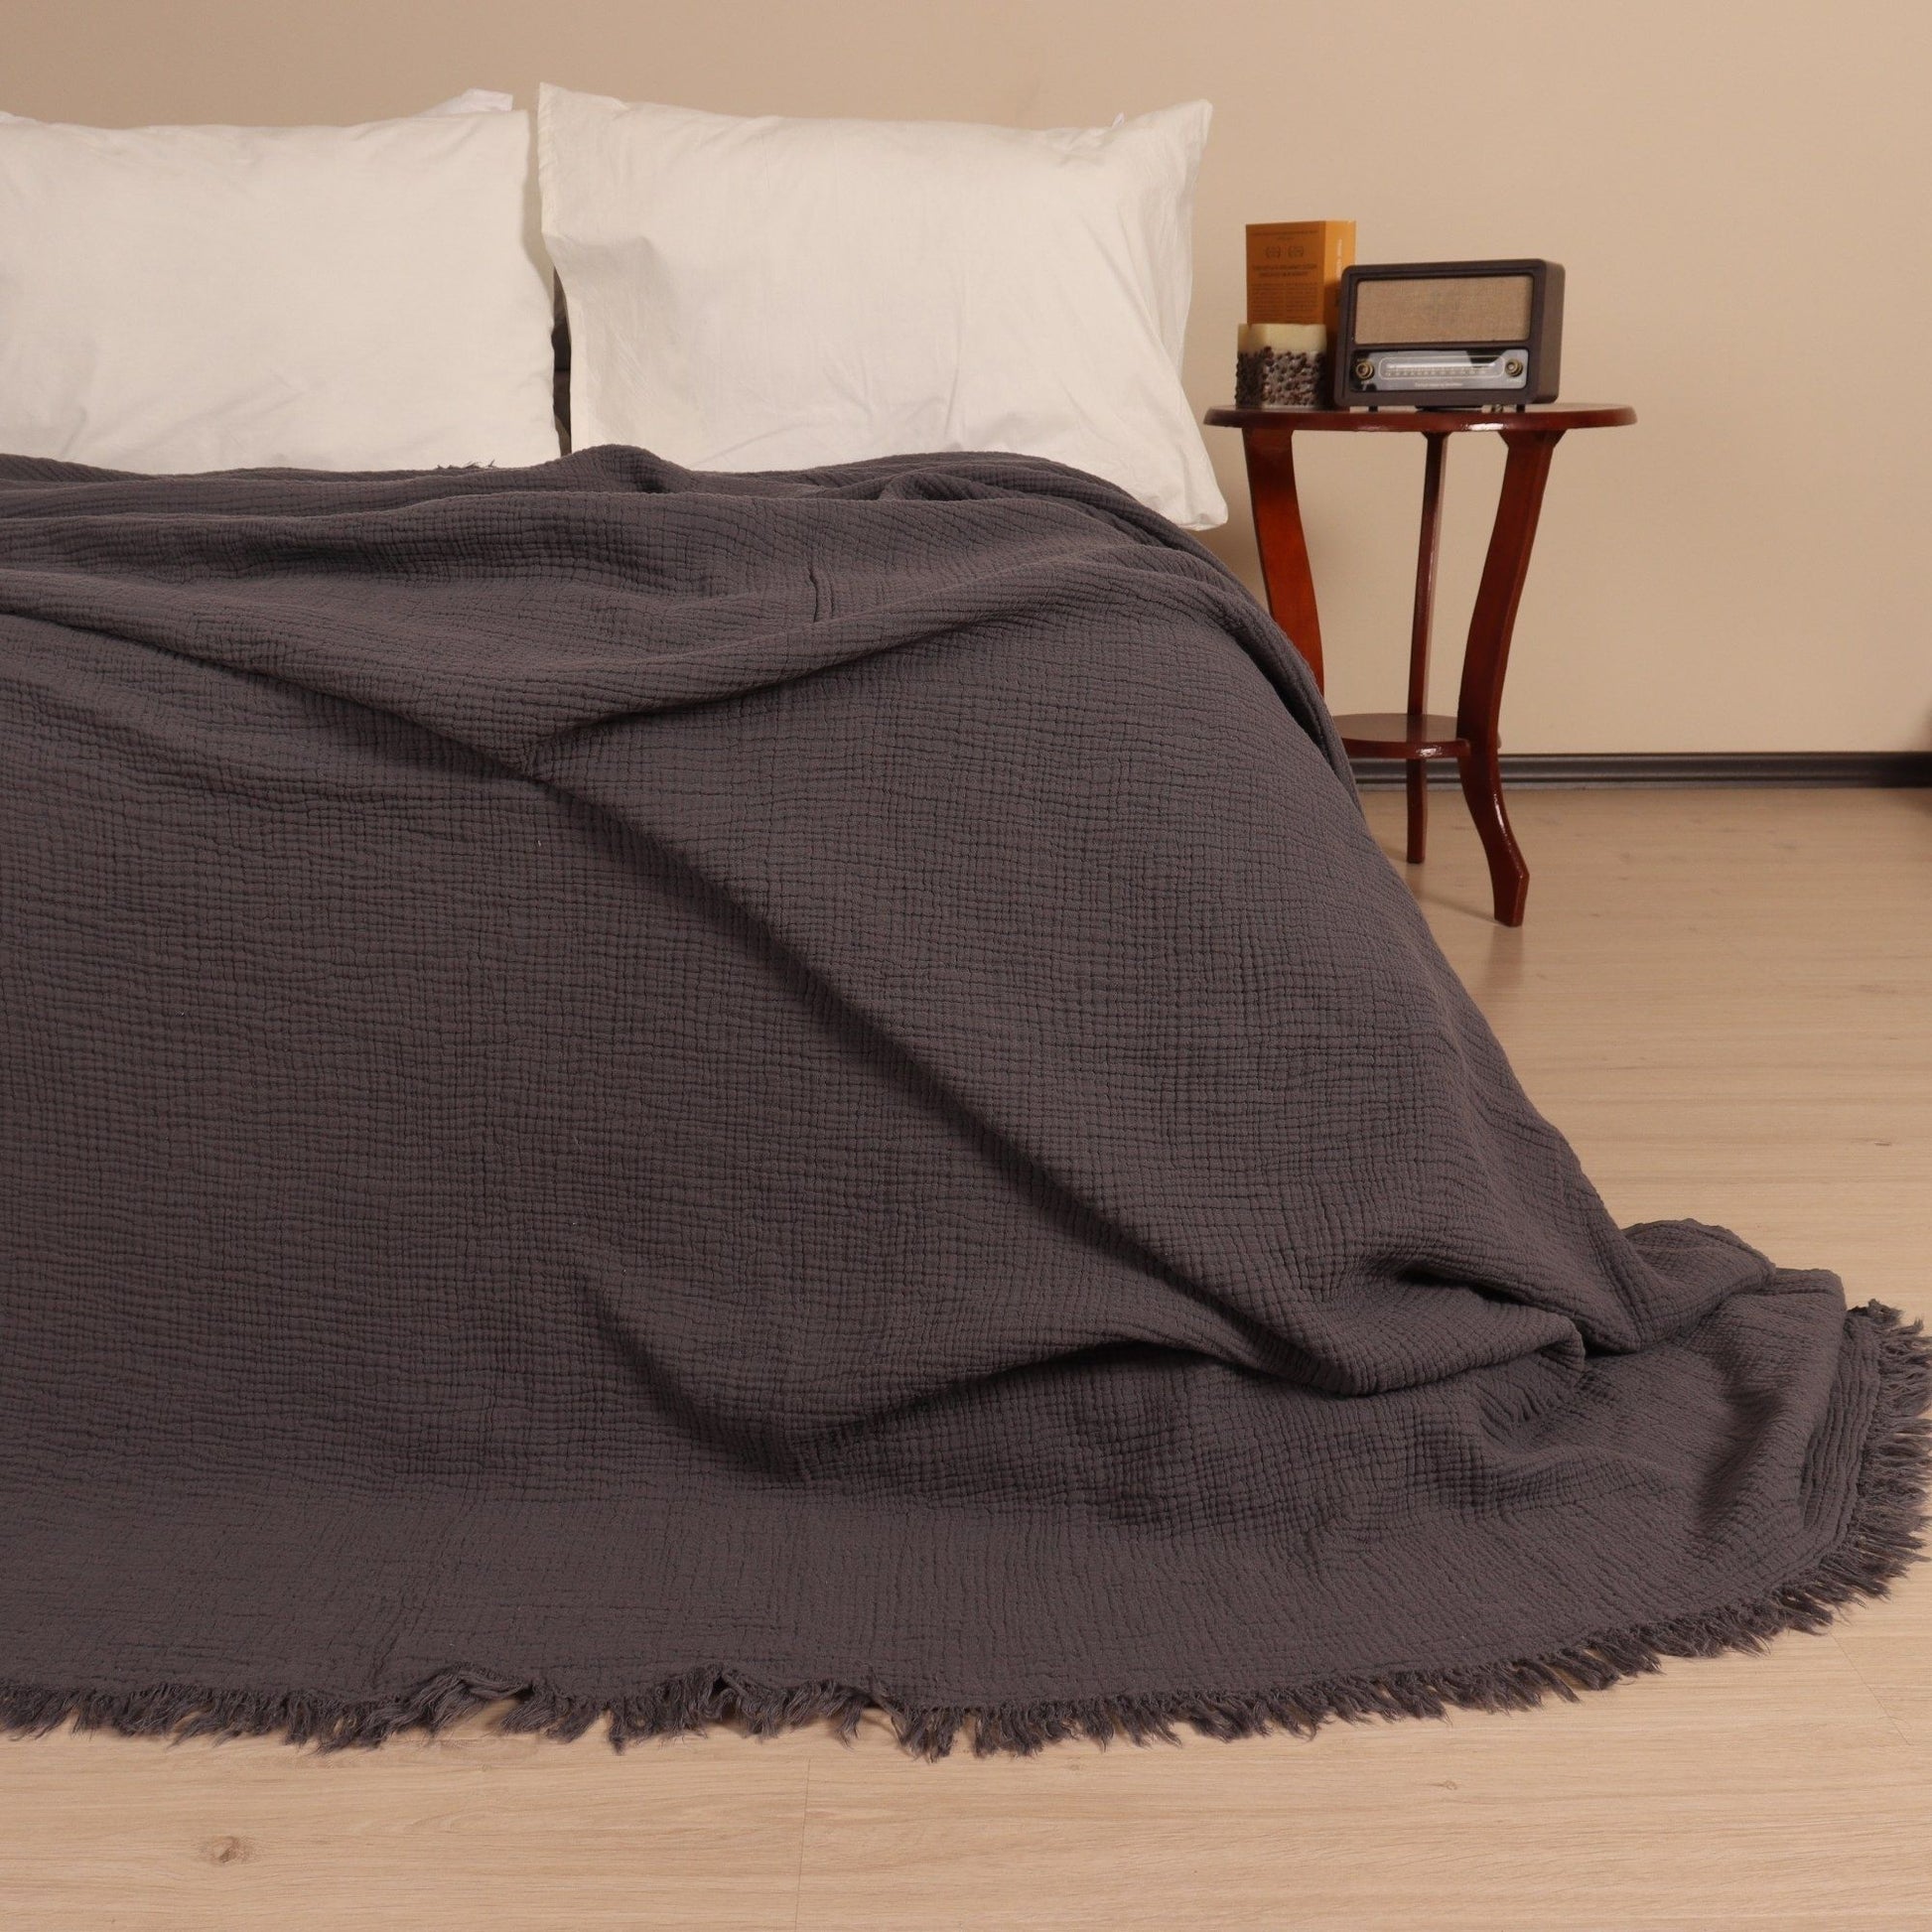 Adult Muslin Blankets anthracite 2